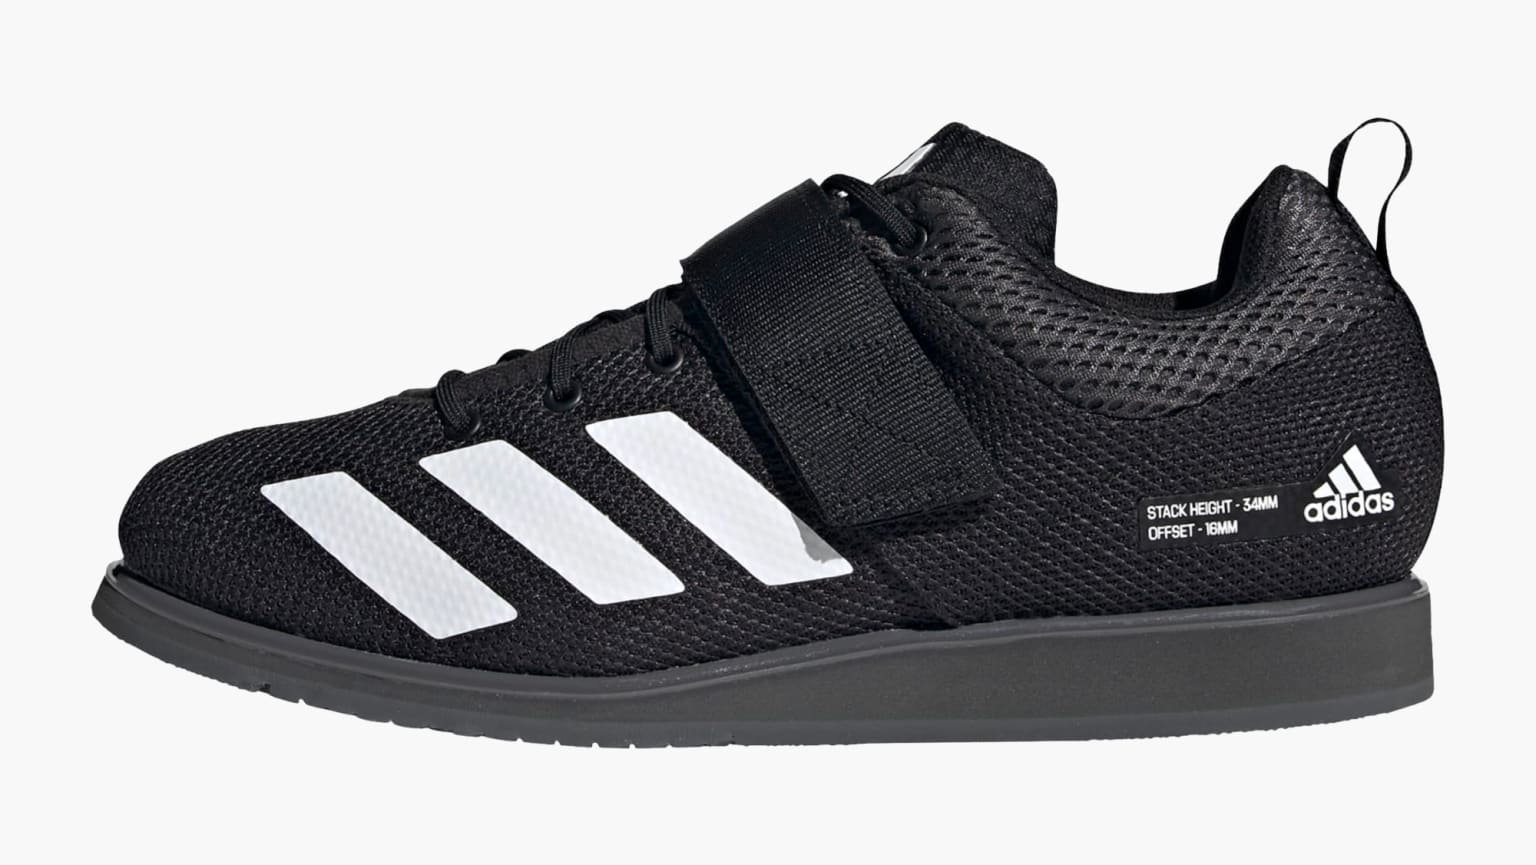 Ventilación tabaco Albany Adidas Powerlift 5 Weightlifting Shoes - Core Black / Ftwr White / Gray Six  | Rogue Fitness